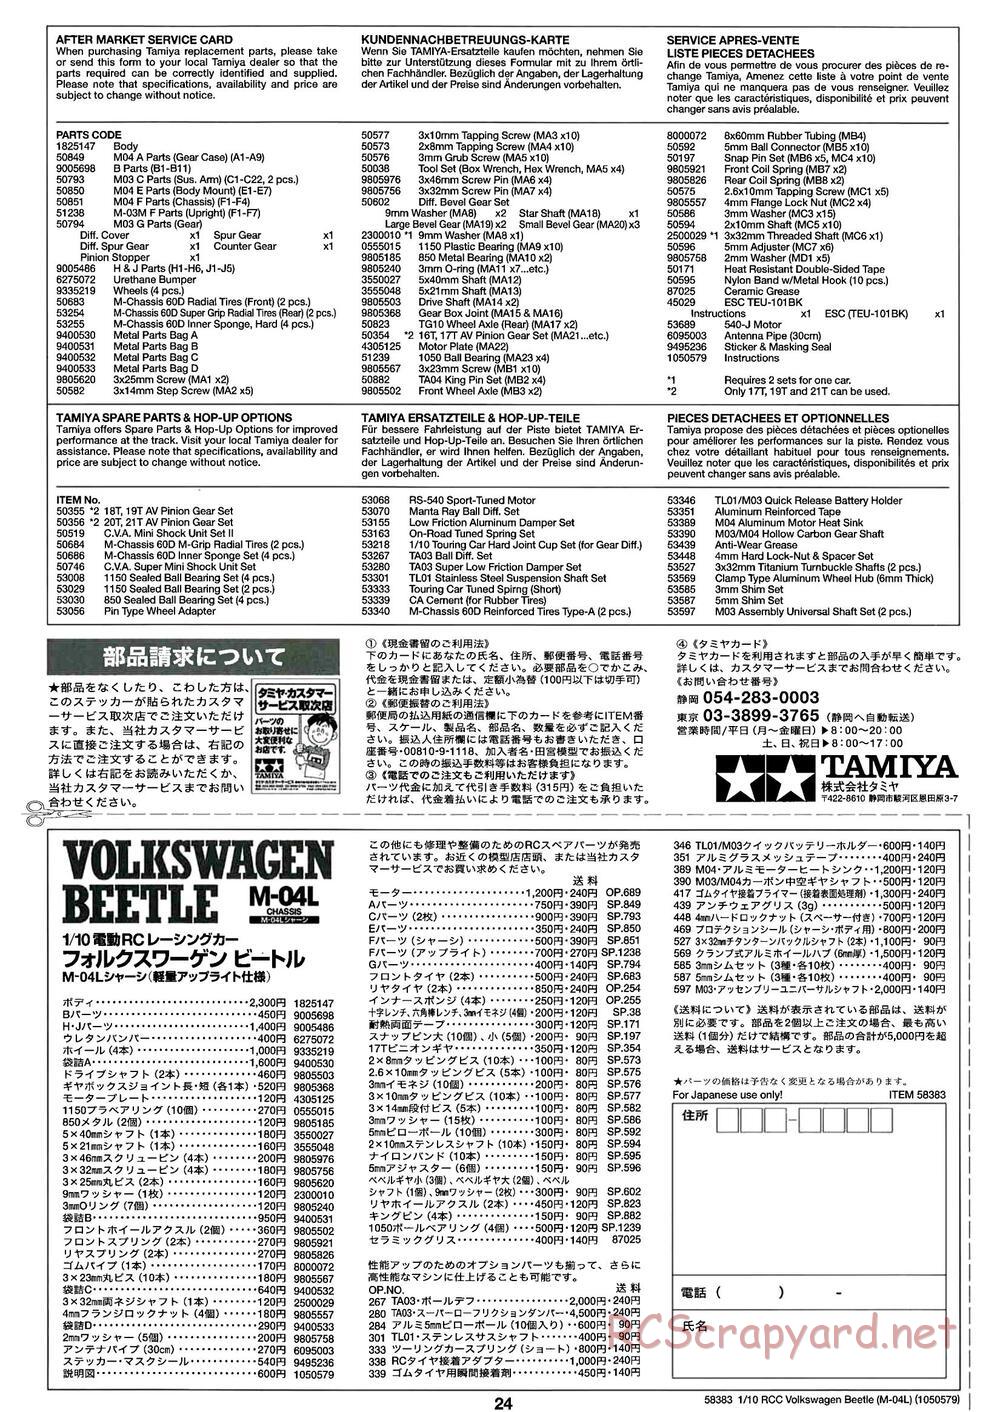 Tamiya - Volkswagen Beetle - M04L Chassis - Manual - Page 24